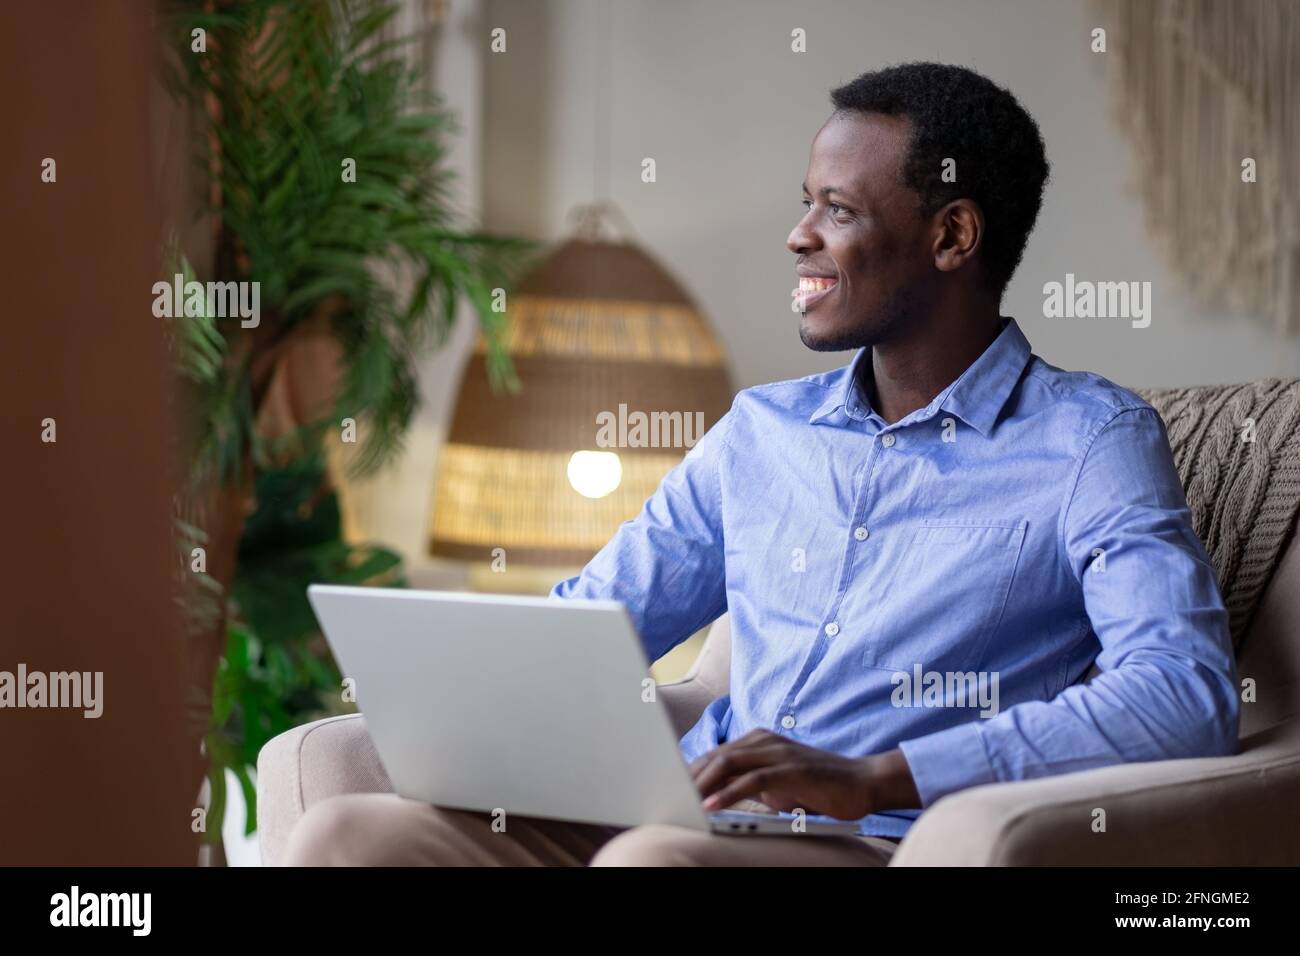 African man surfing the internet in his room at home Stock Photo